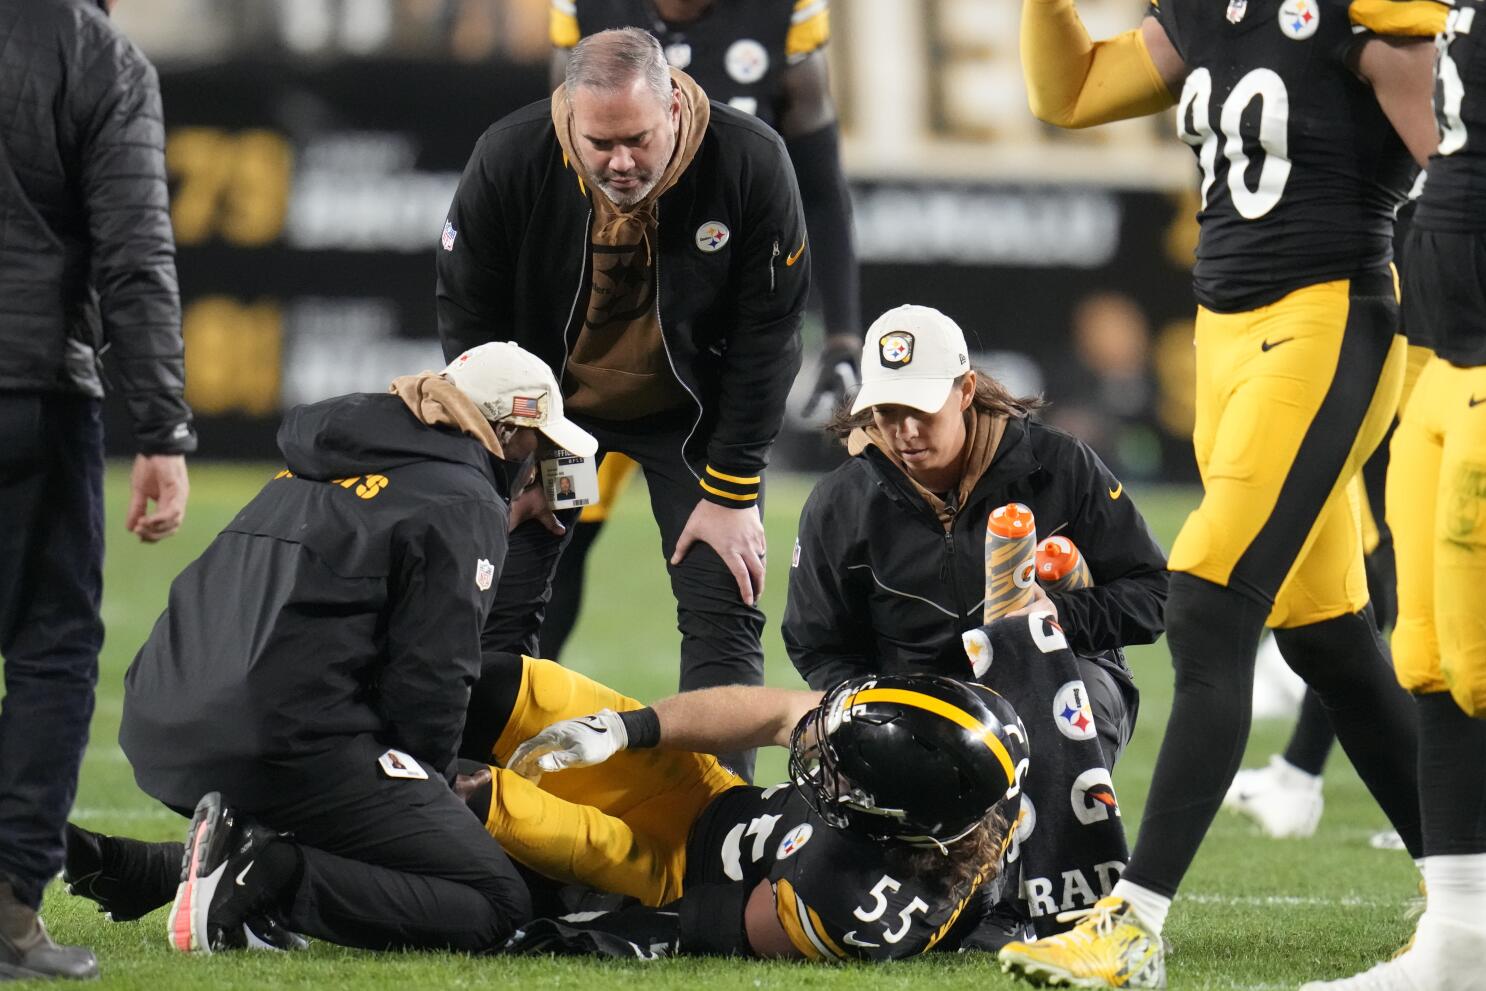 Steelers place linebacker Cole Holcomb on injured reserve, active